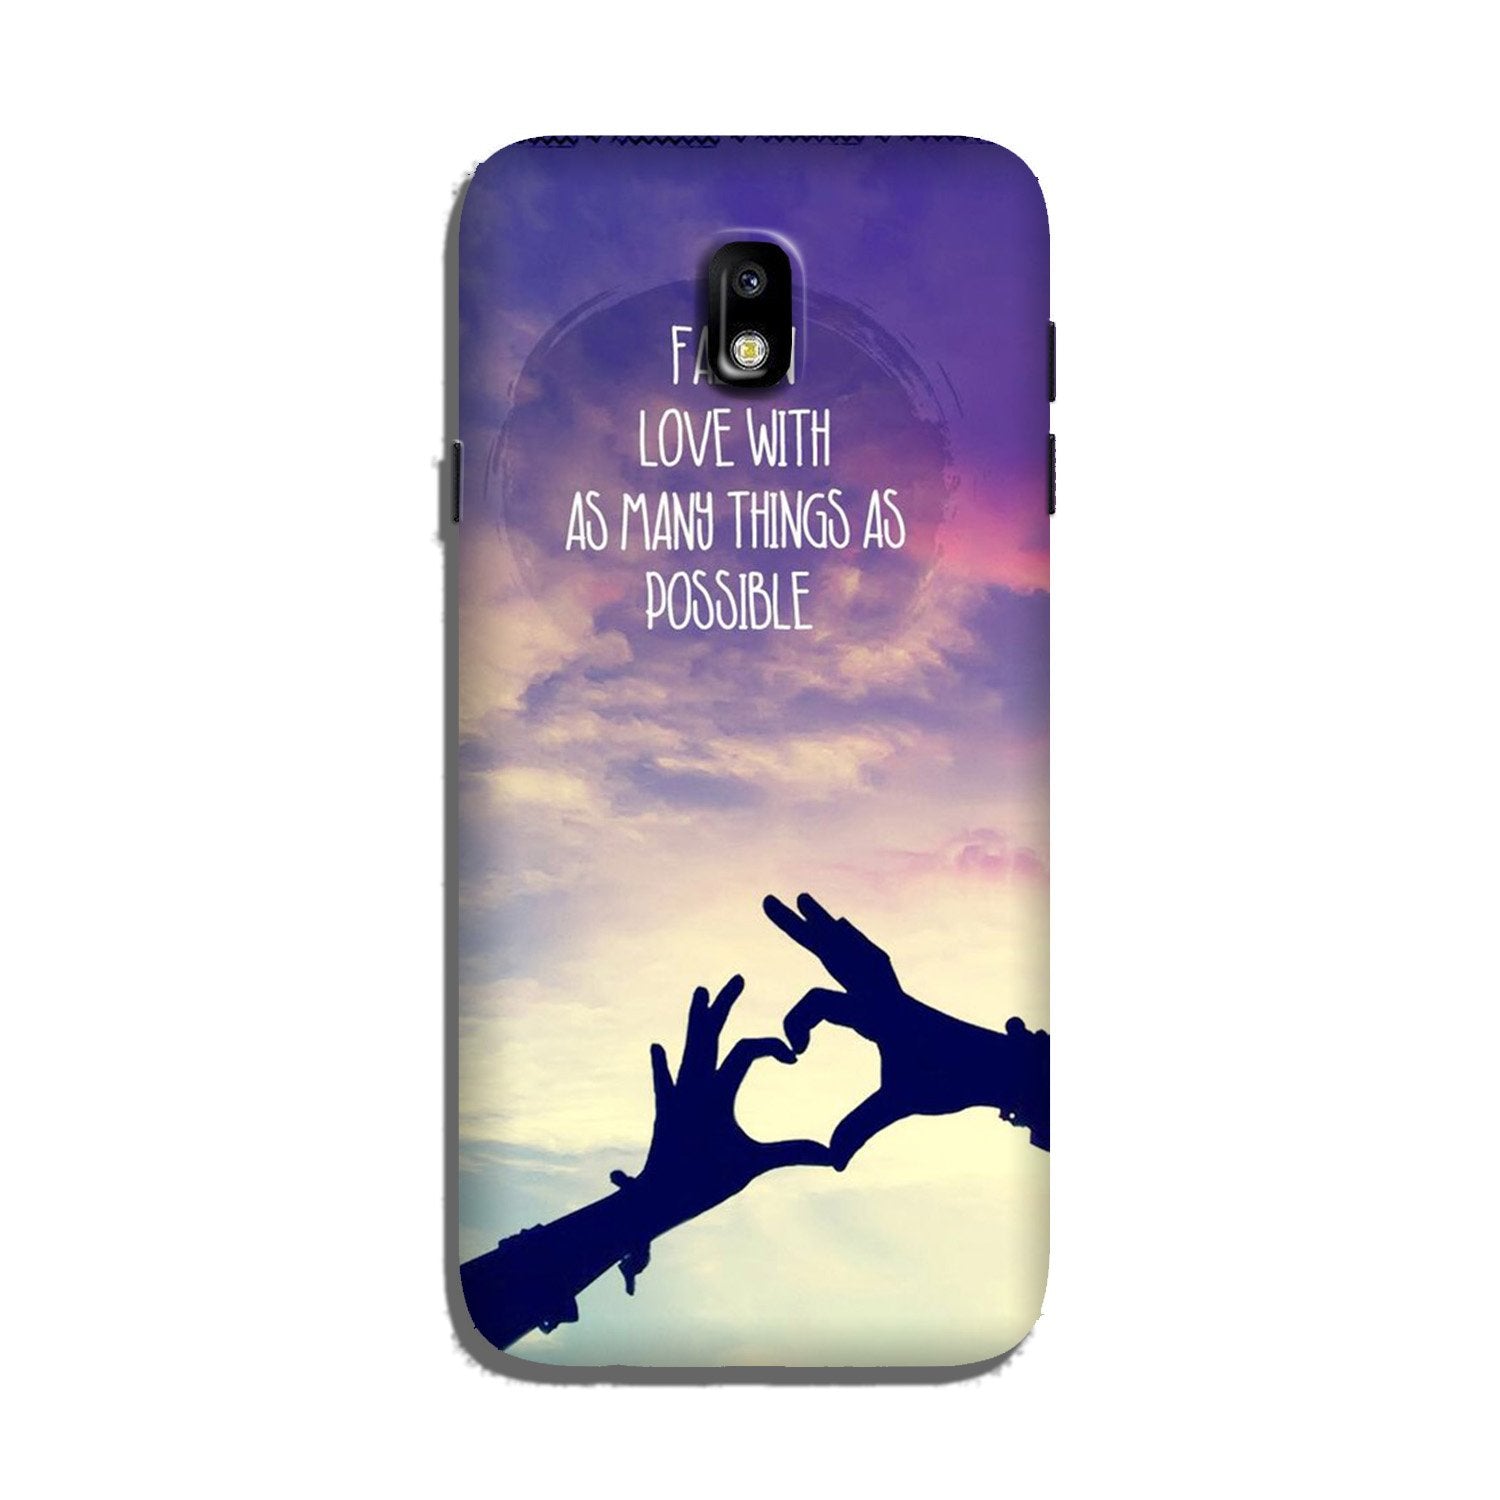 Fall in love Case for Galaxy J5 Pro